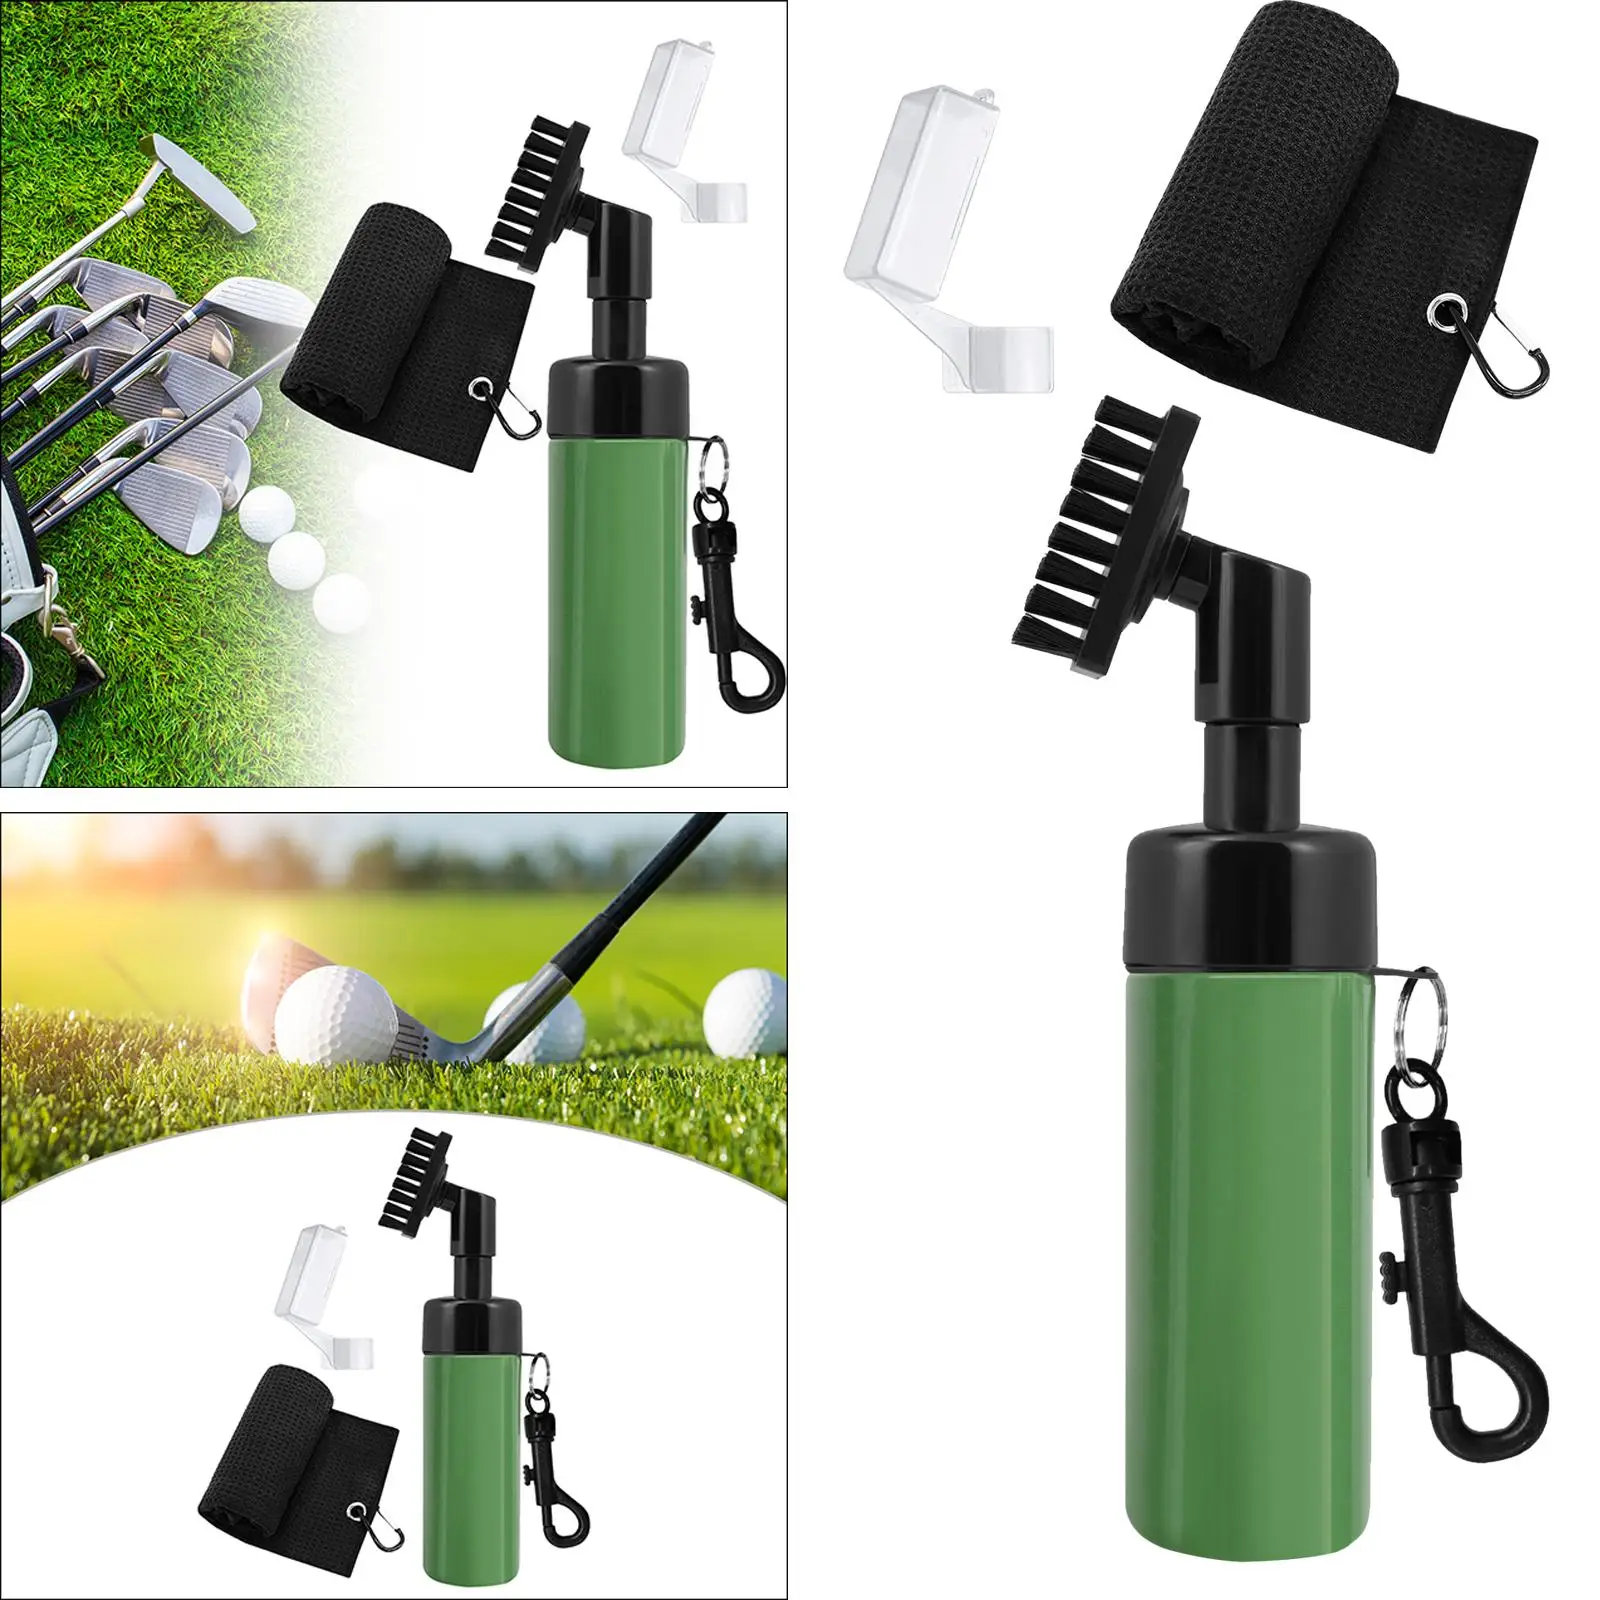 Golf Club Brush with Water Bottle, Golf Club Towel, Golf Cleaning Brush with Clip